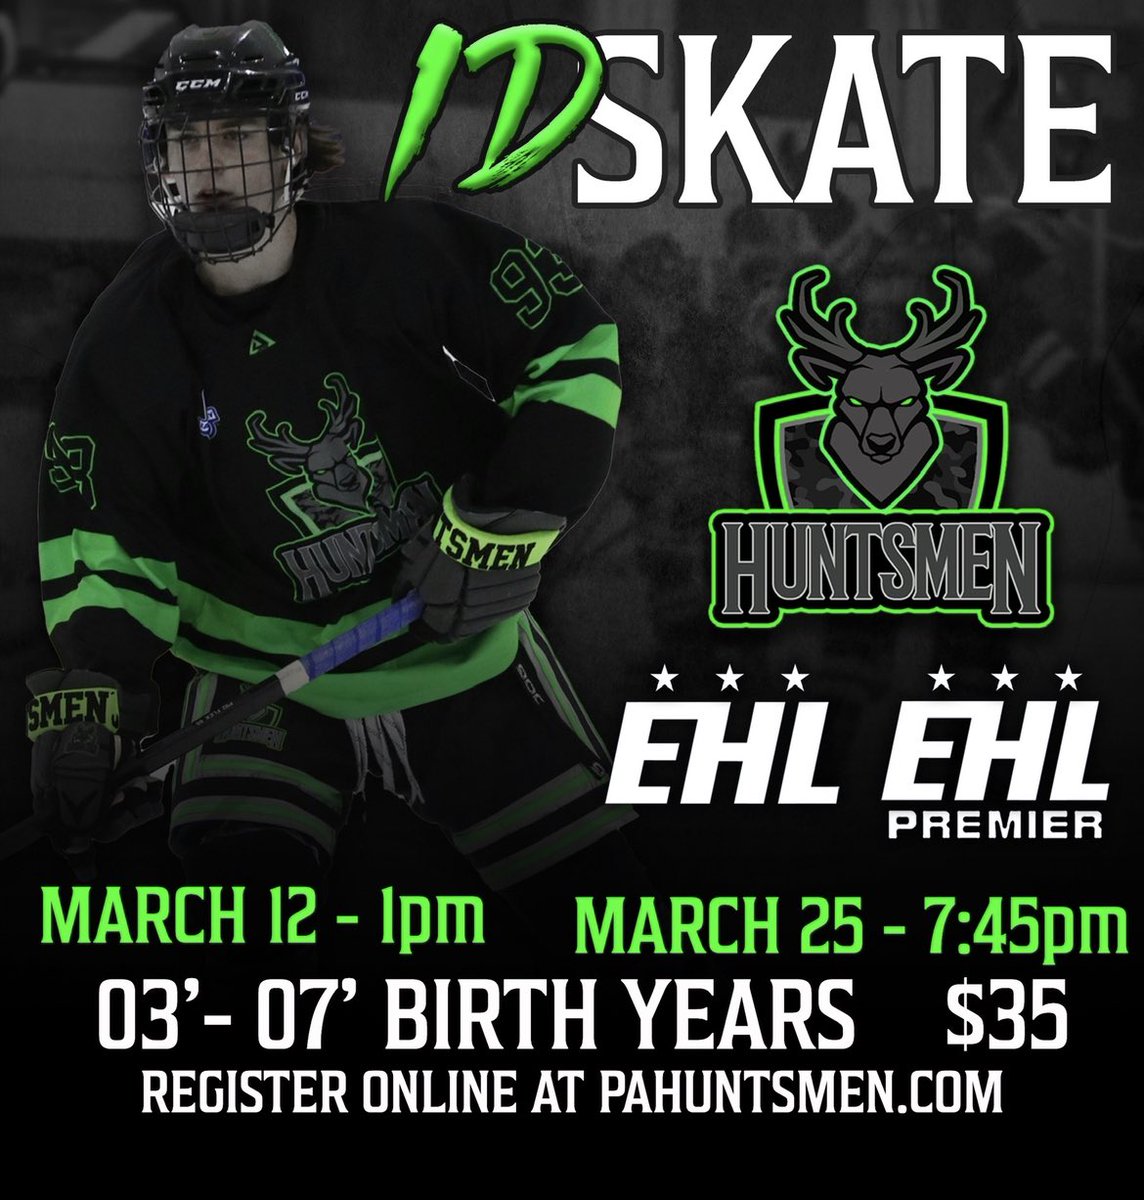 2 Weeks Away! Registration for our 2023-24 @EHL_Hockey @EHLpremier ID skates are LIVE! #Jointhehunt for a skate and see what we are all about! 

#Eshow #Buckup